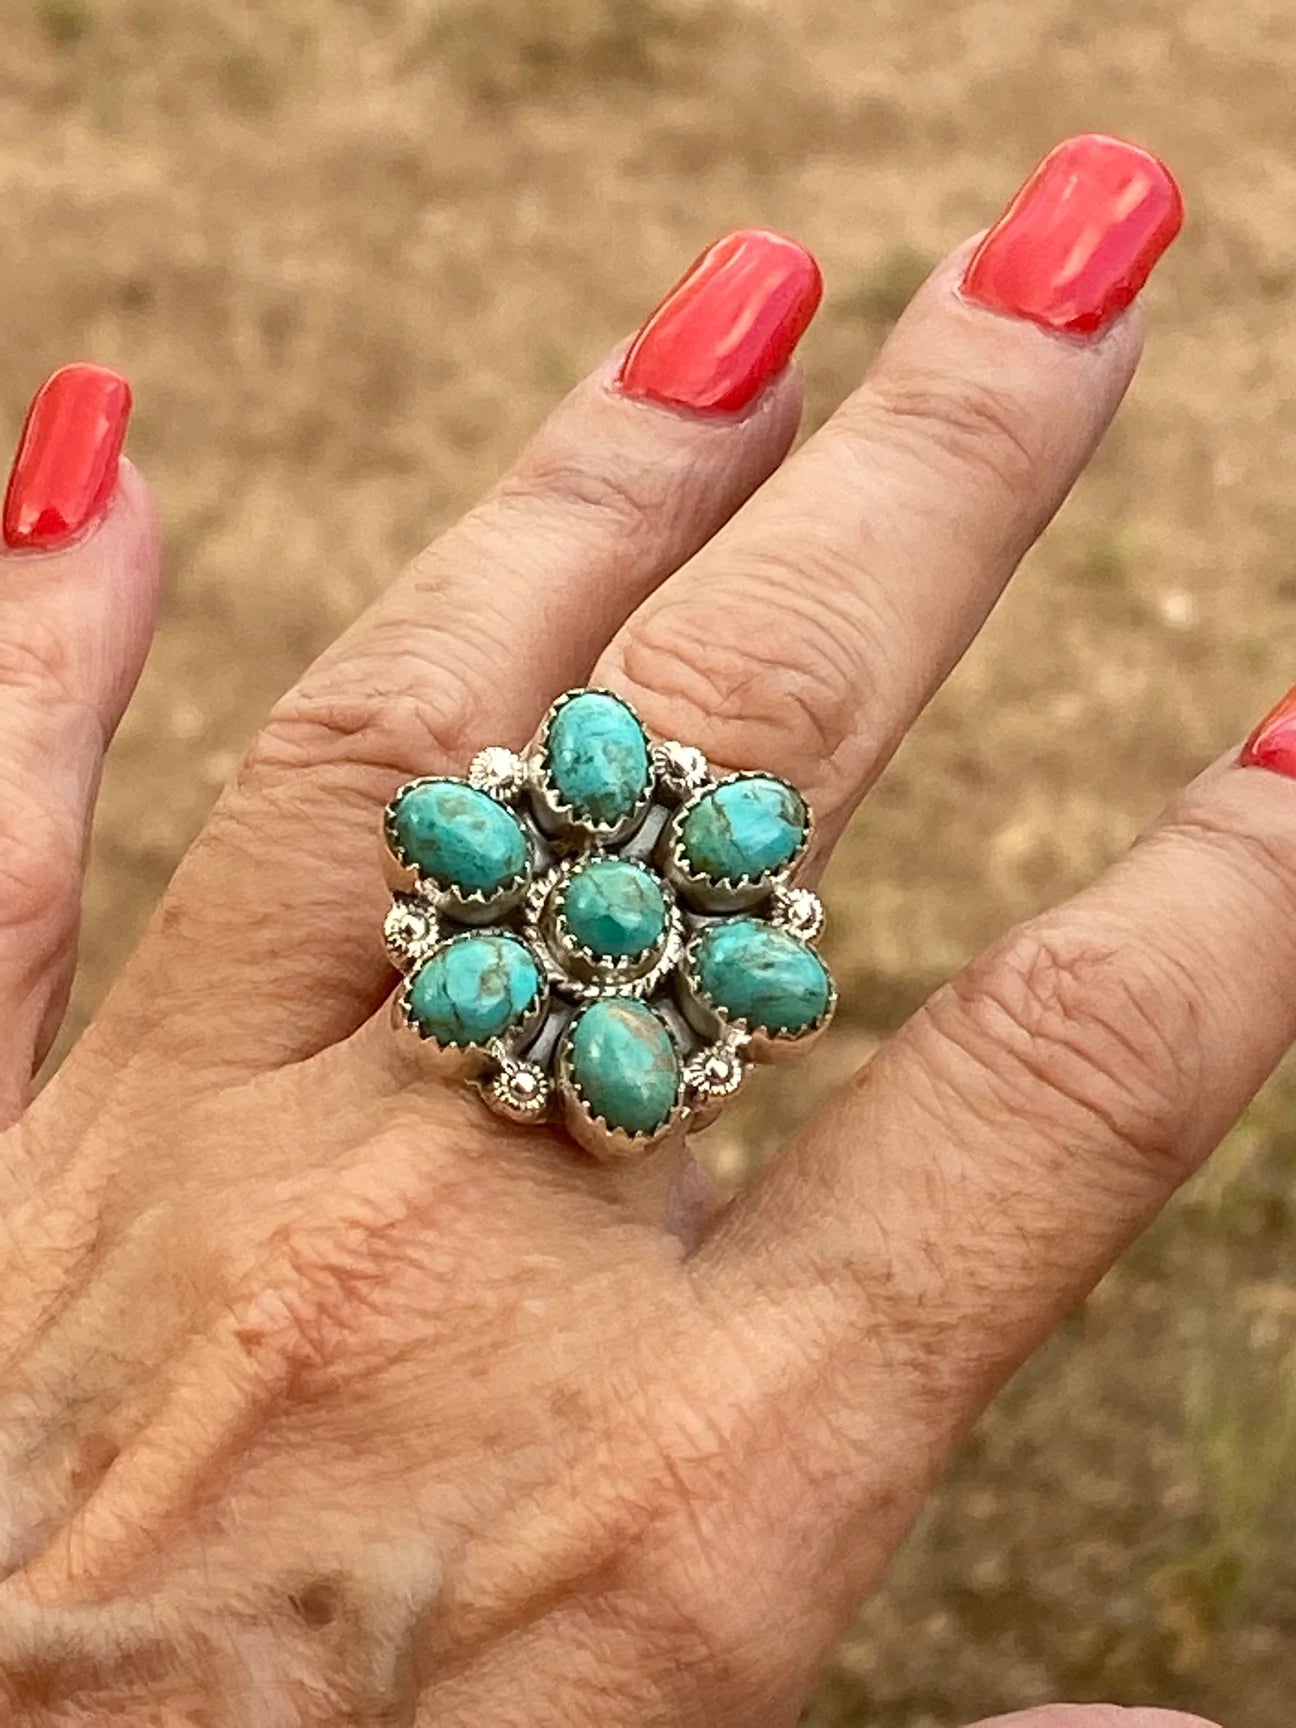 Floral Kingman Turquoise and Sterling Silver Adjustable Ring